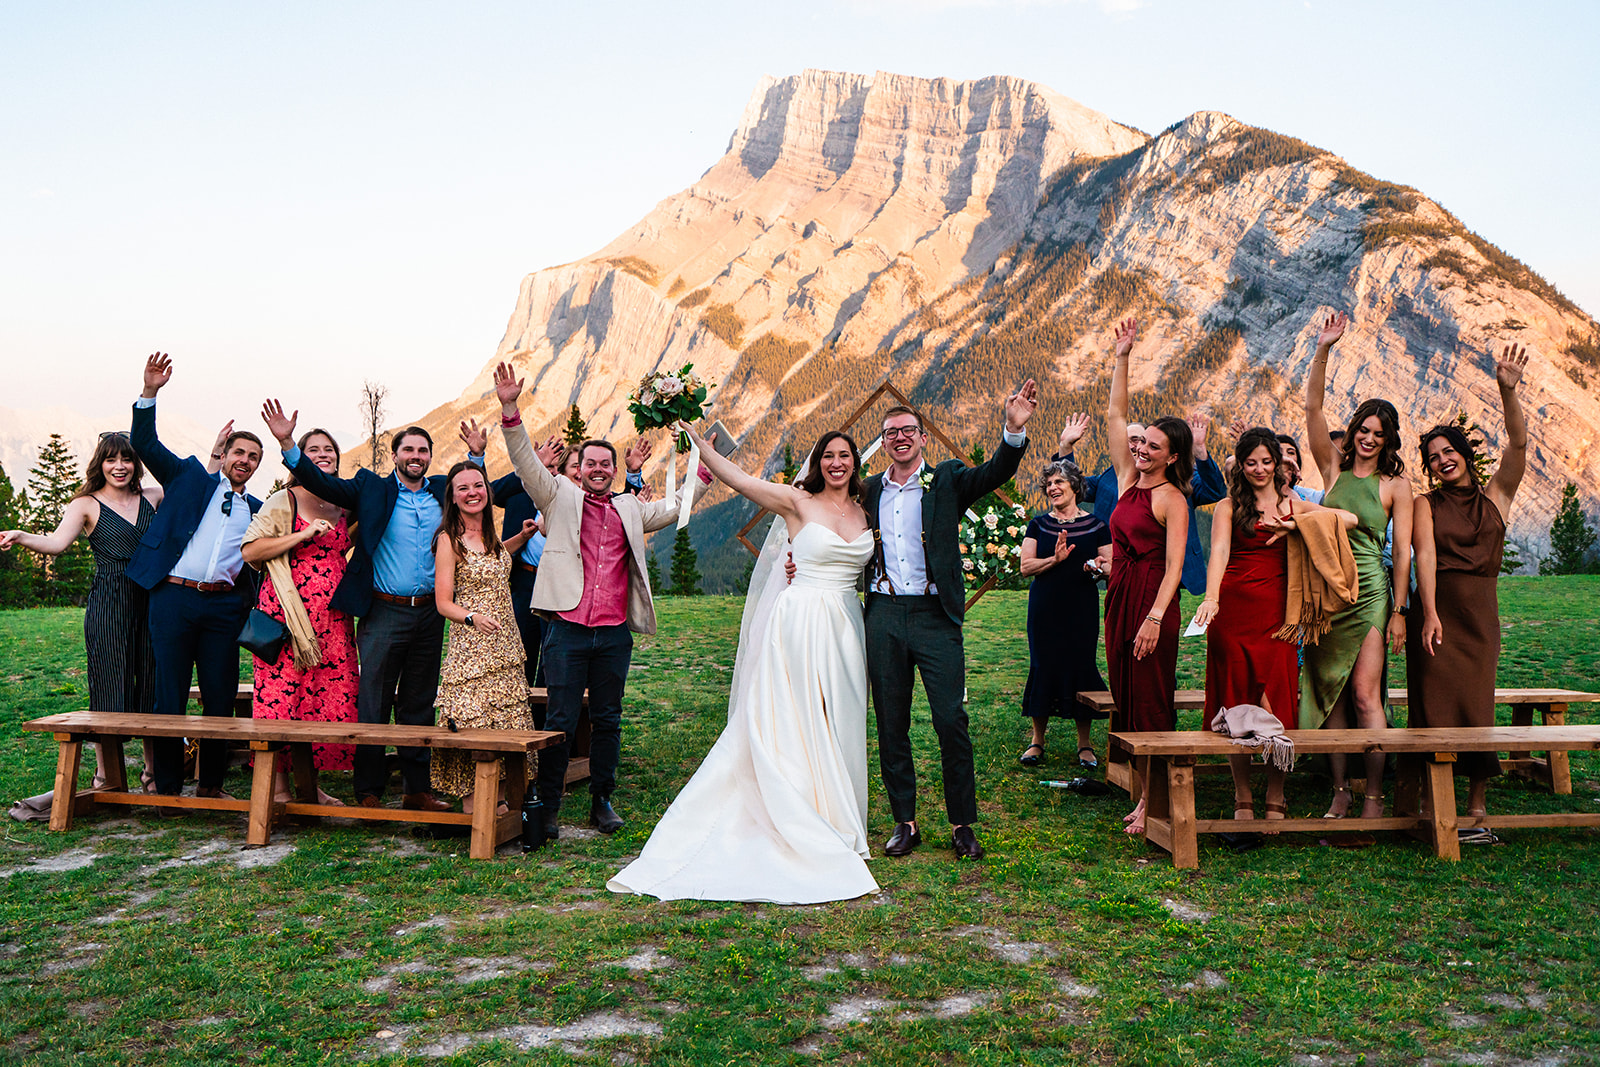 Bride and groom cheering after their Banff wedding ceremony